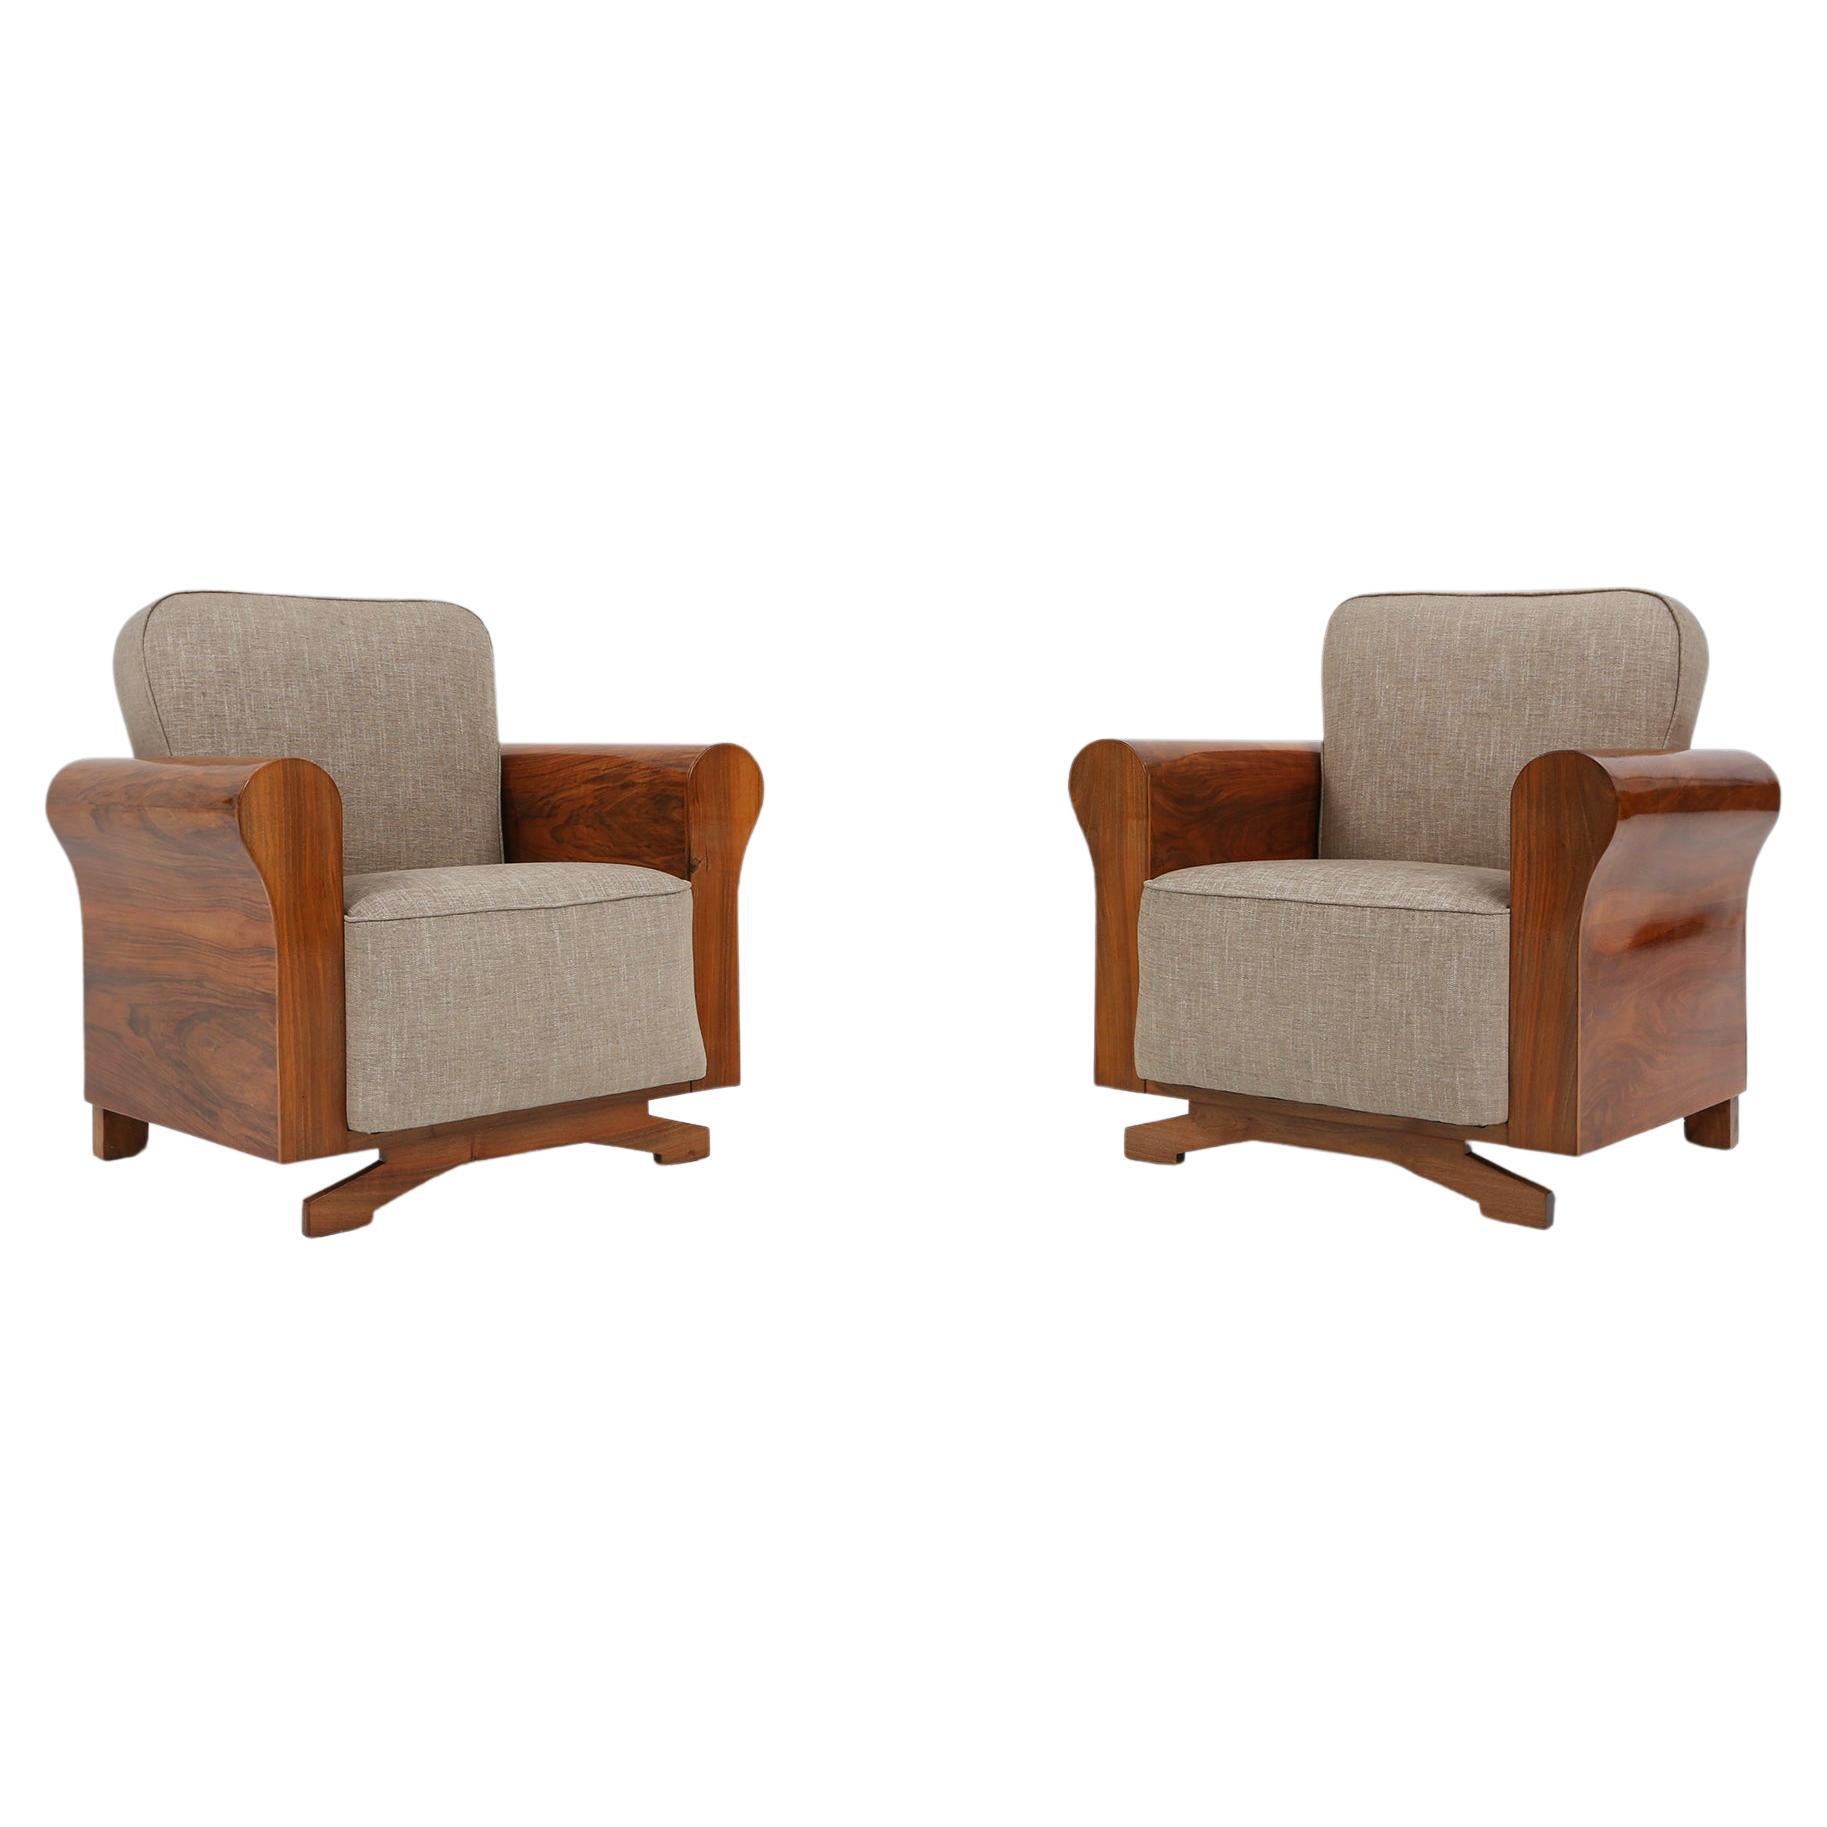 A set of 2 beautiful made Art Deco armchairs with walnut veneer, France, 1930